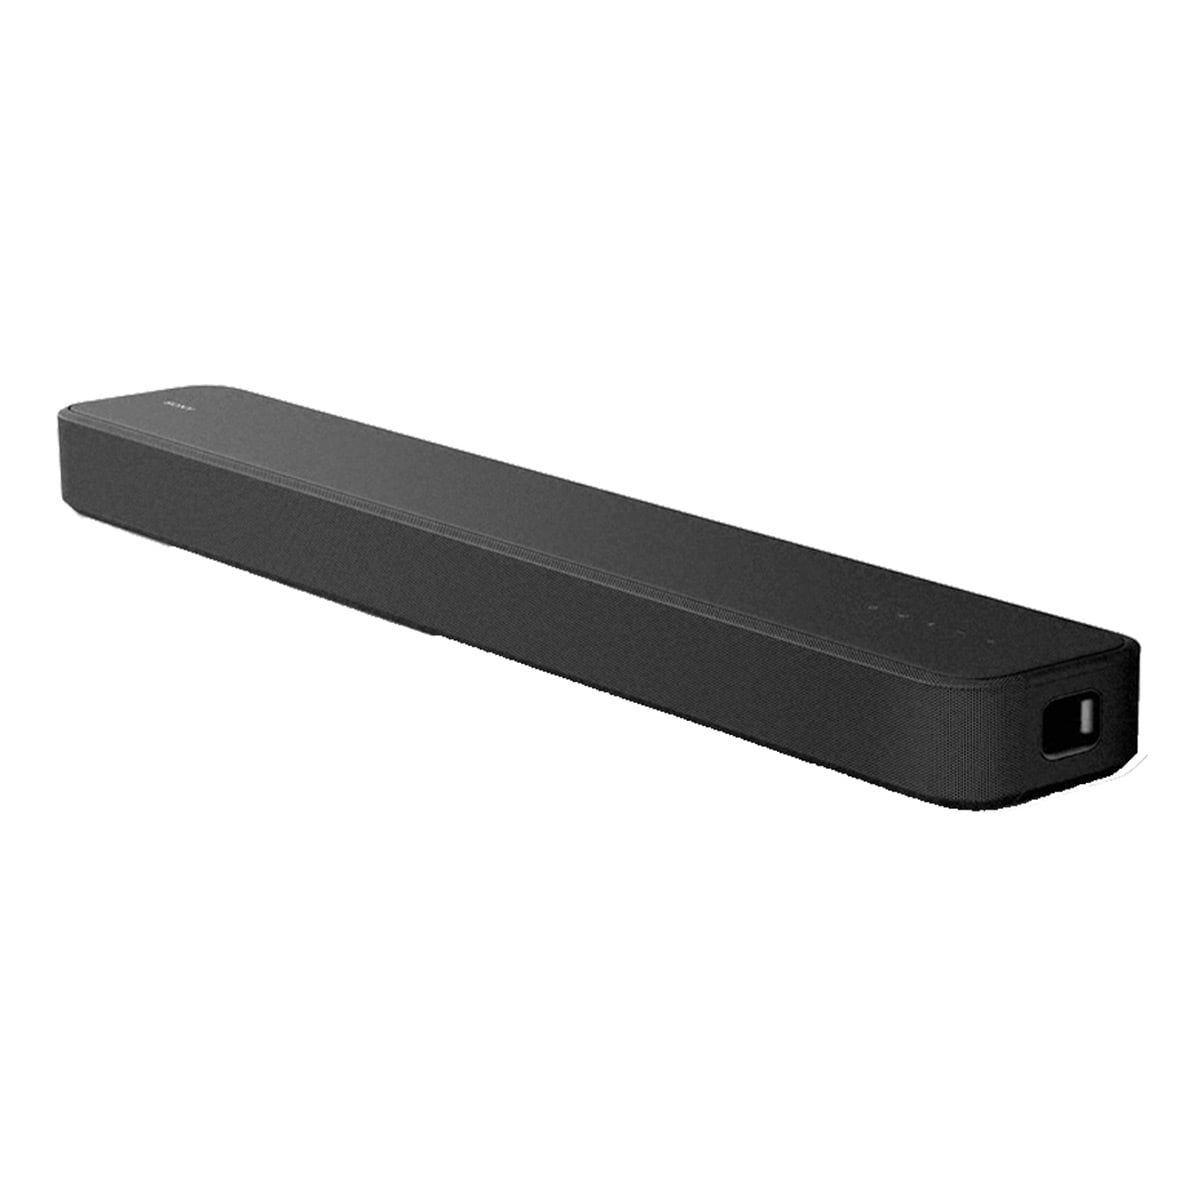 Dual Atmos with Soundbar Built-In HT-S2000 Subwoofer Dolby Sony 3.1ch